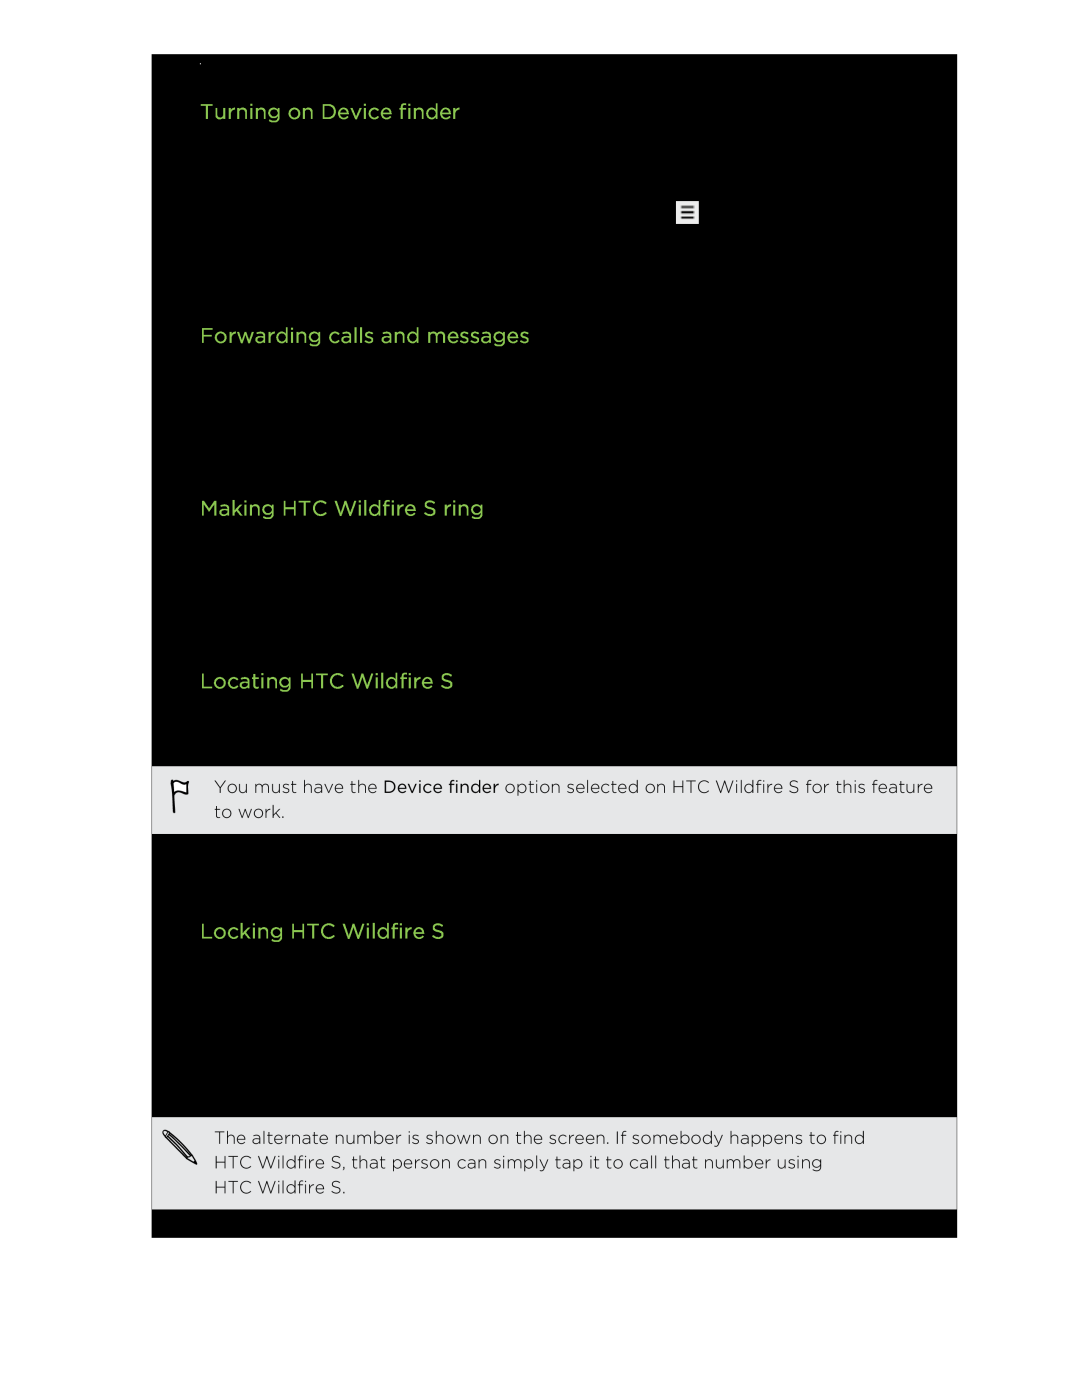 HTC manual Turning on Device finder, Forwarding calls and messages, Making HTC Wildfire S ring, Locating HTC Wildfire S 